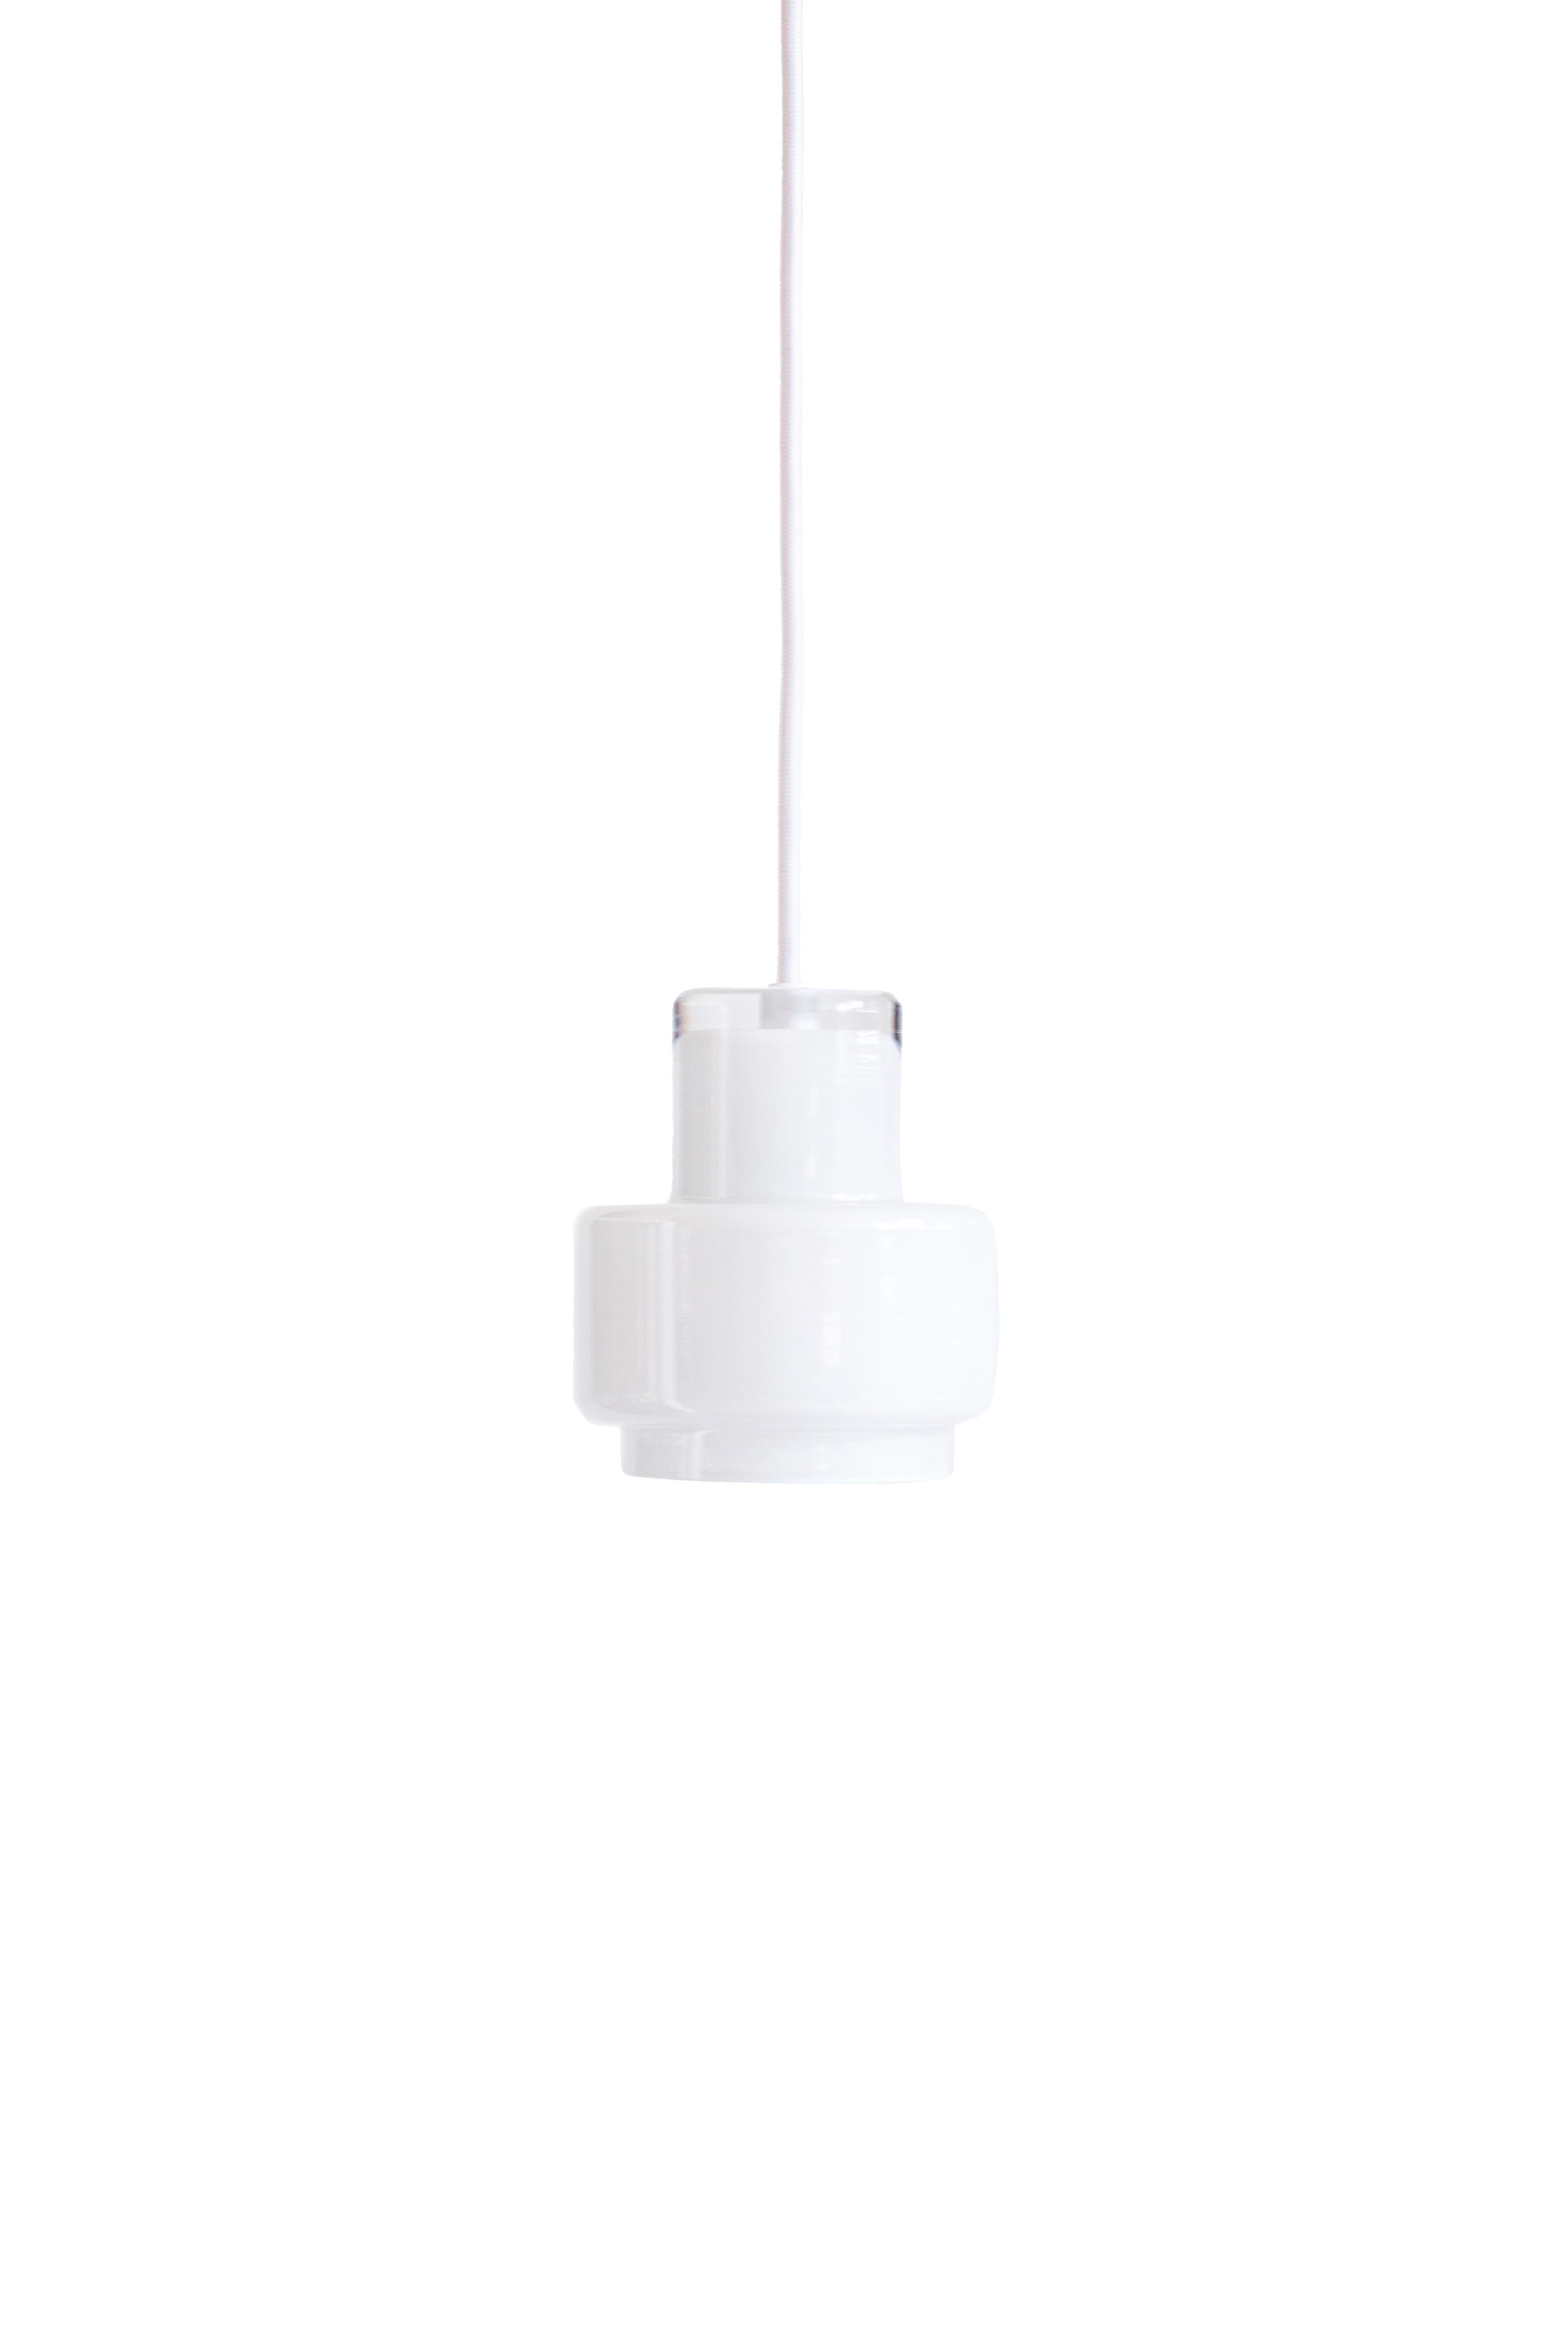 'Multi M' Glass Pendant in Black by Jokinen and Konu for Innolux 6